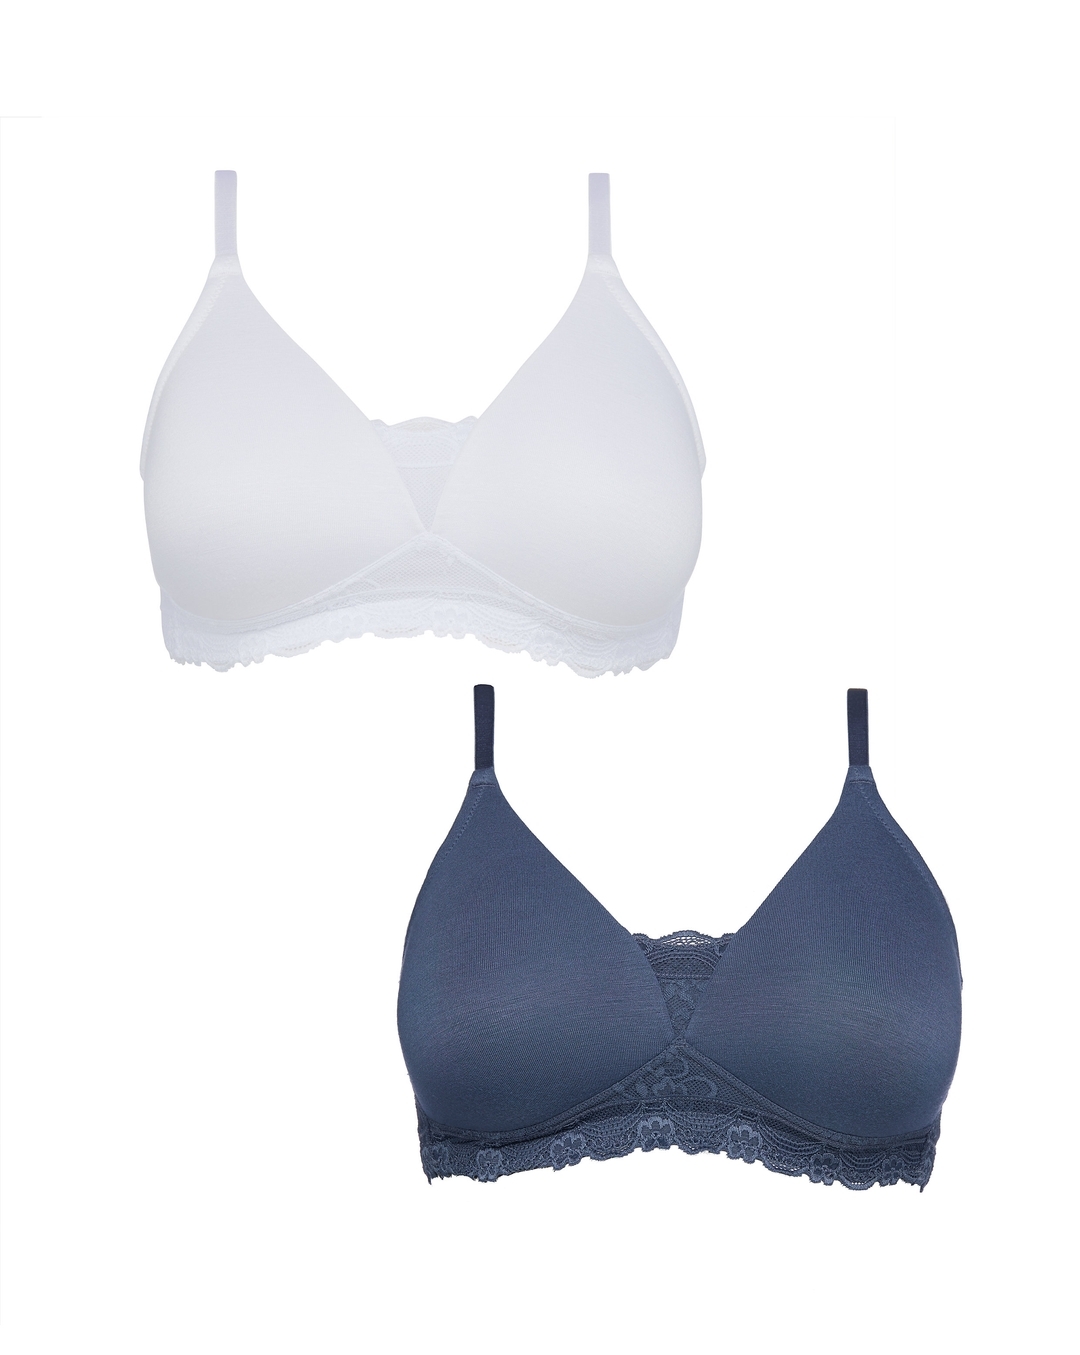 Mothercare Nursing Crop Bras 2pk Non-Wired Unpadded Comfort Multipack  Maternity